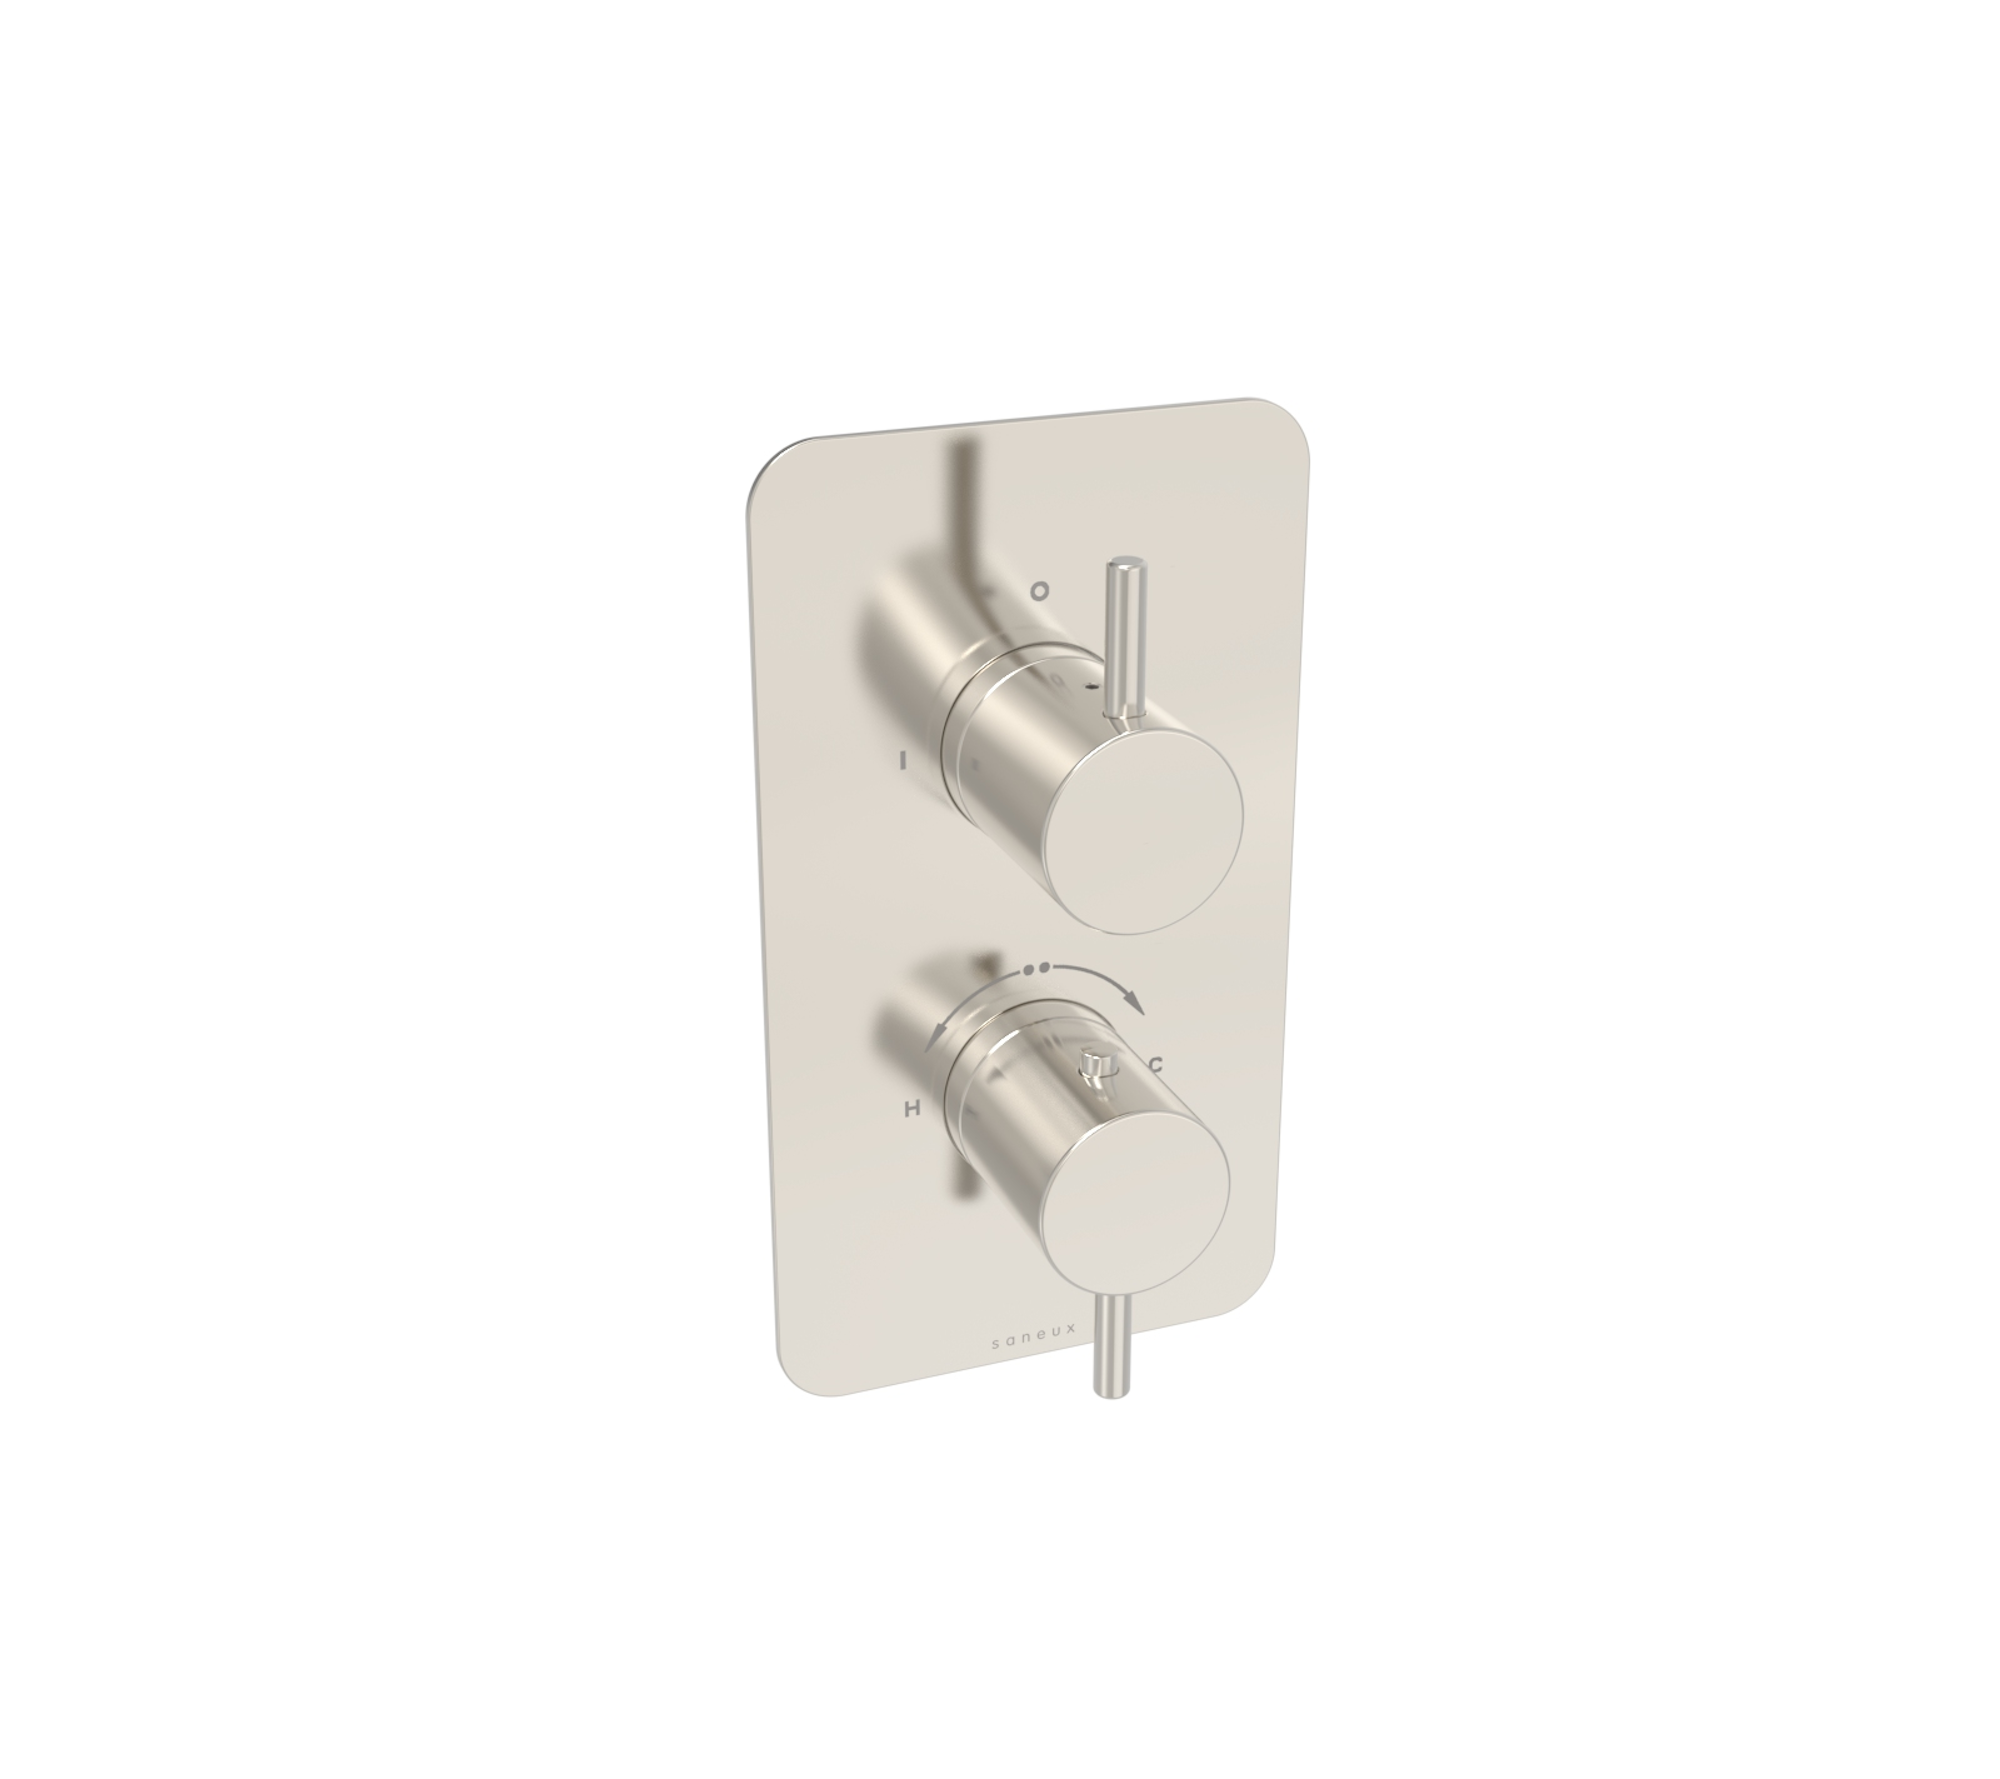 COS 2-way thermostatic shower valve kit - Brushed Nickel